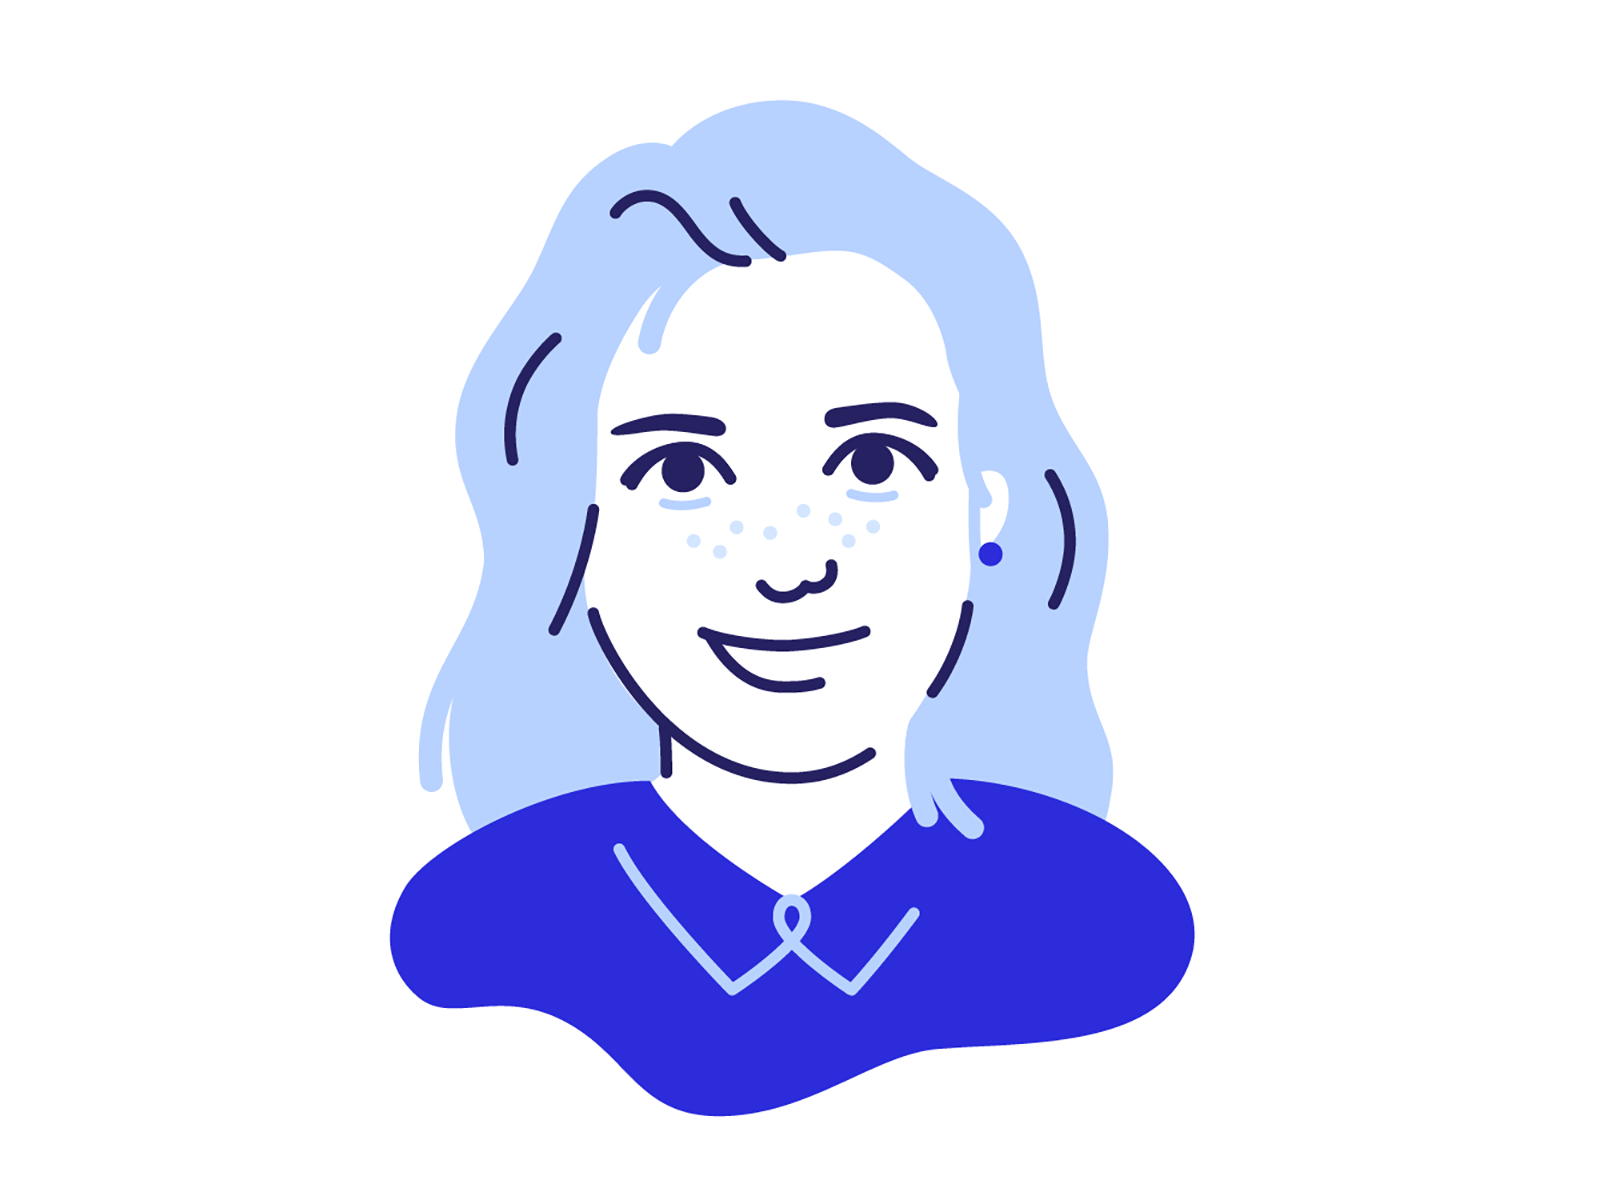 Sarah by Jessie Noble for NJI Media on Dribbble